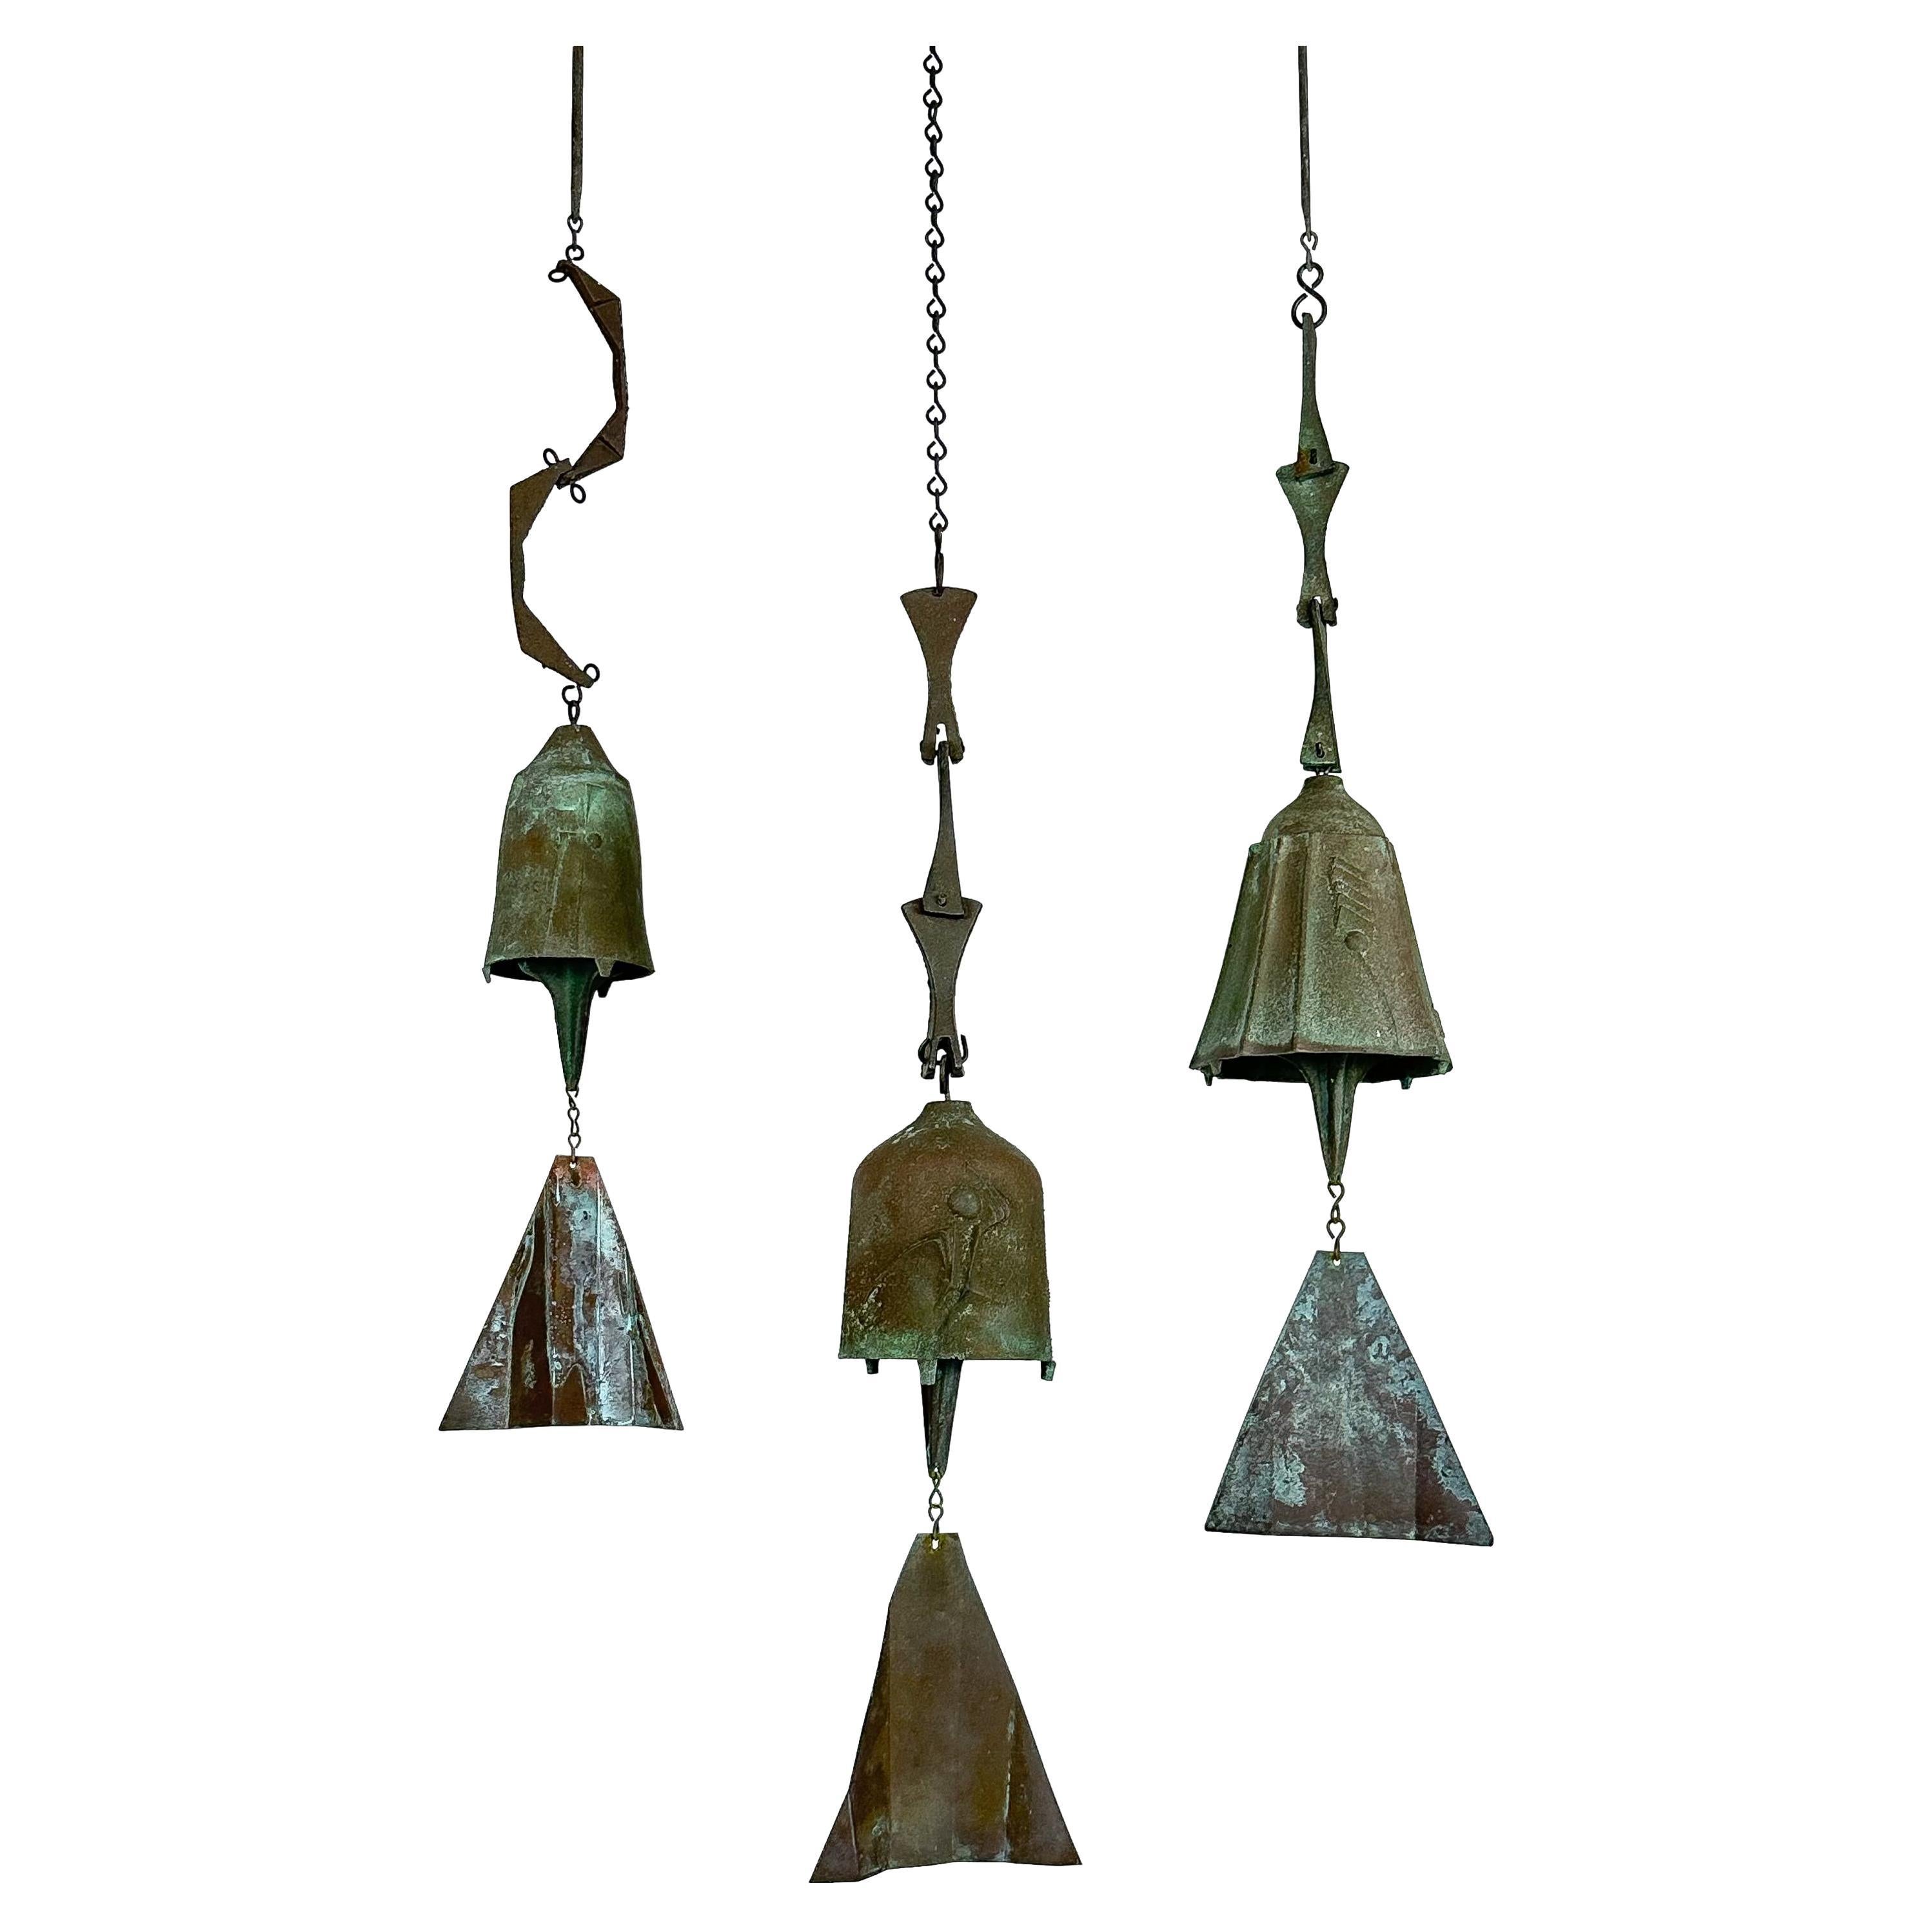 Set of 3 Bronze Bells / Wind Chimes by Paolo Soleri for Arcosanti